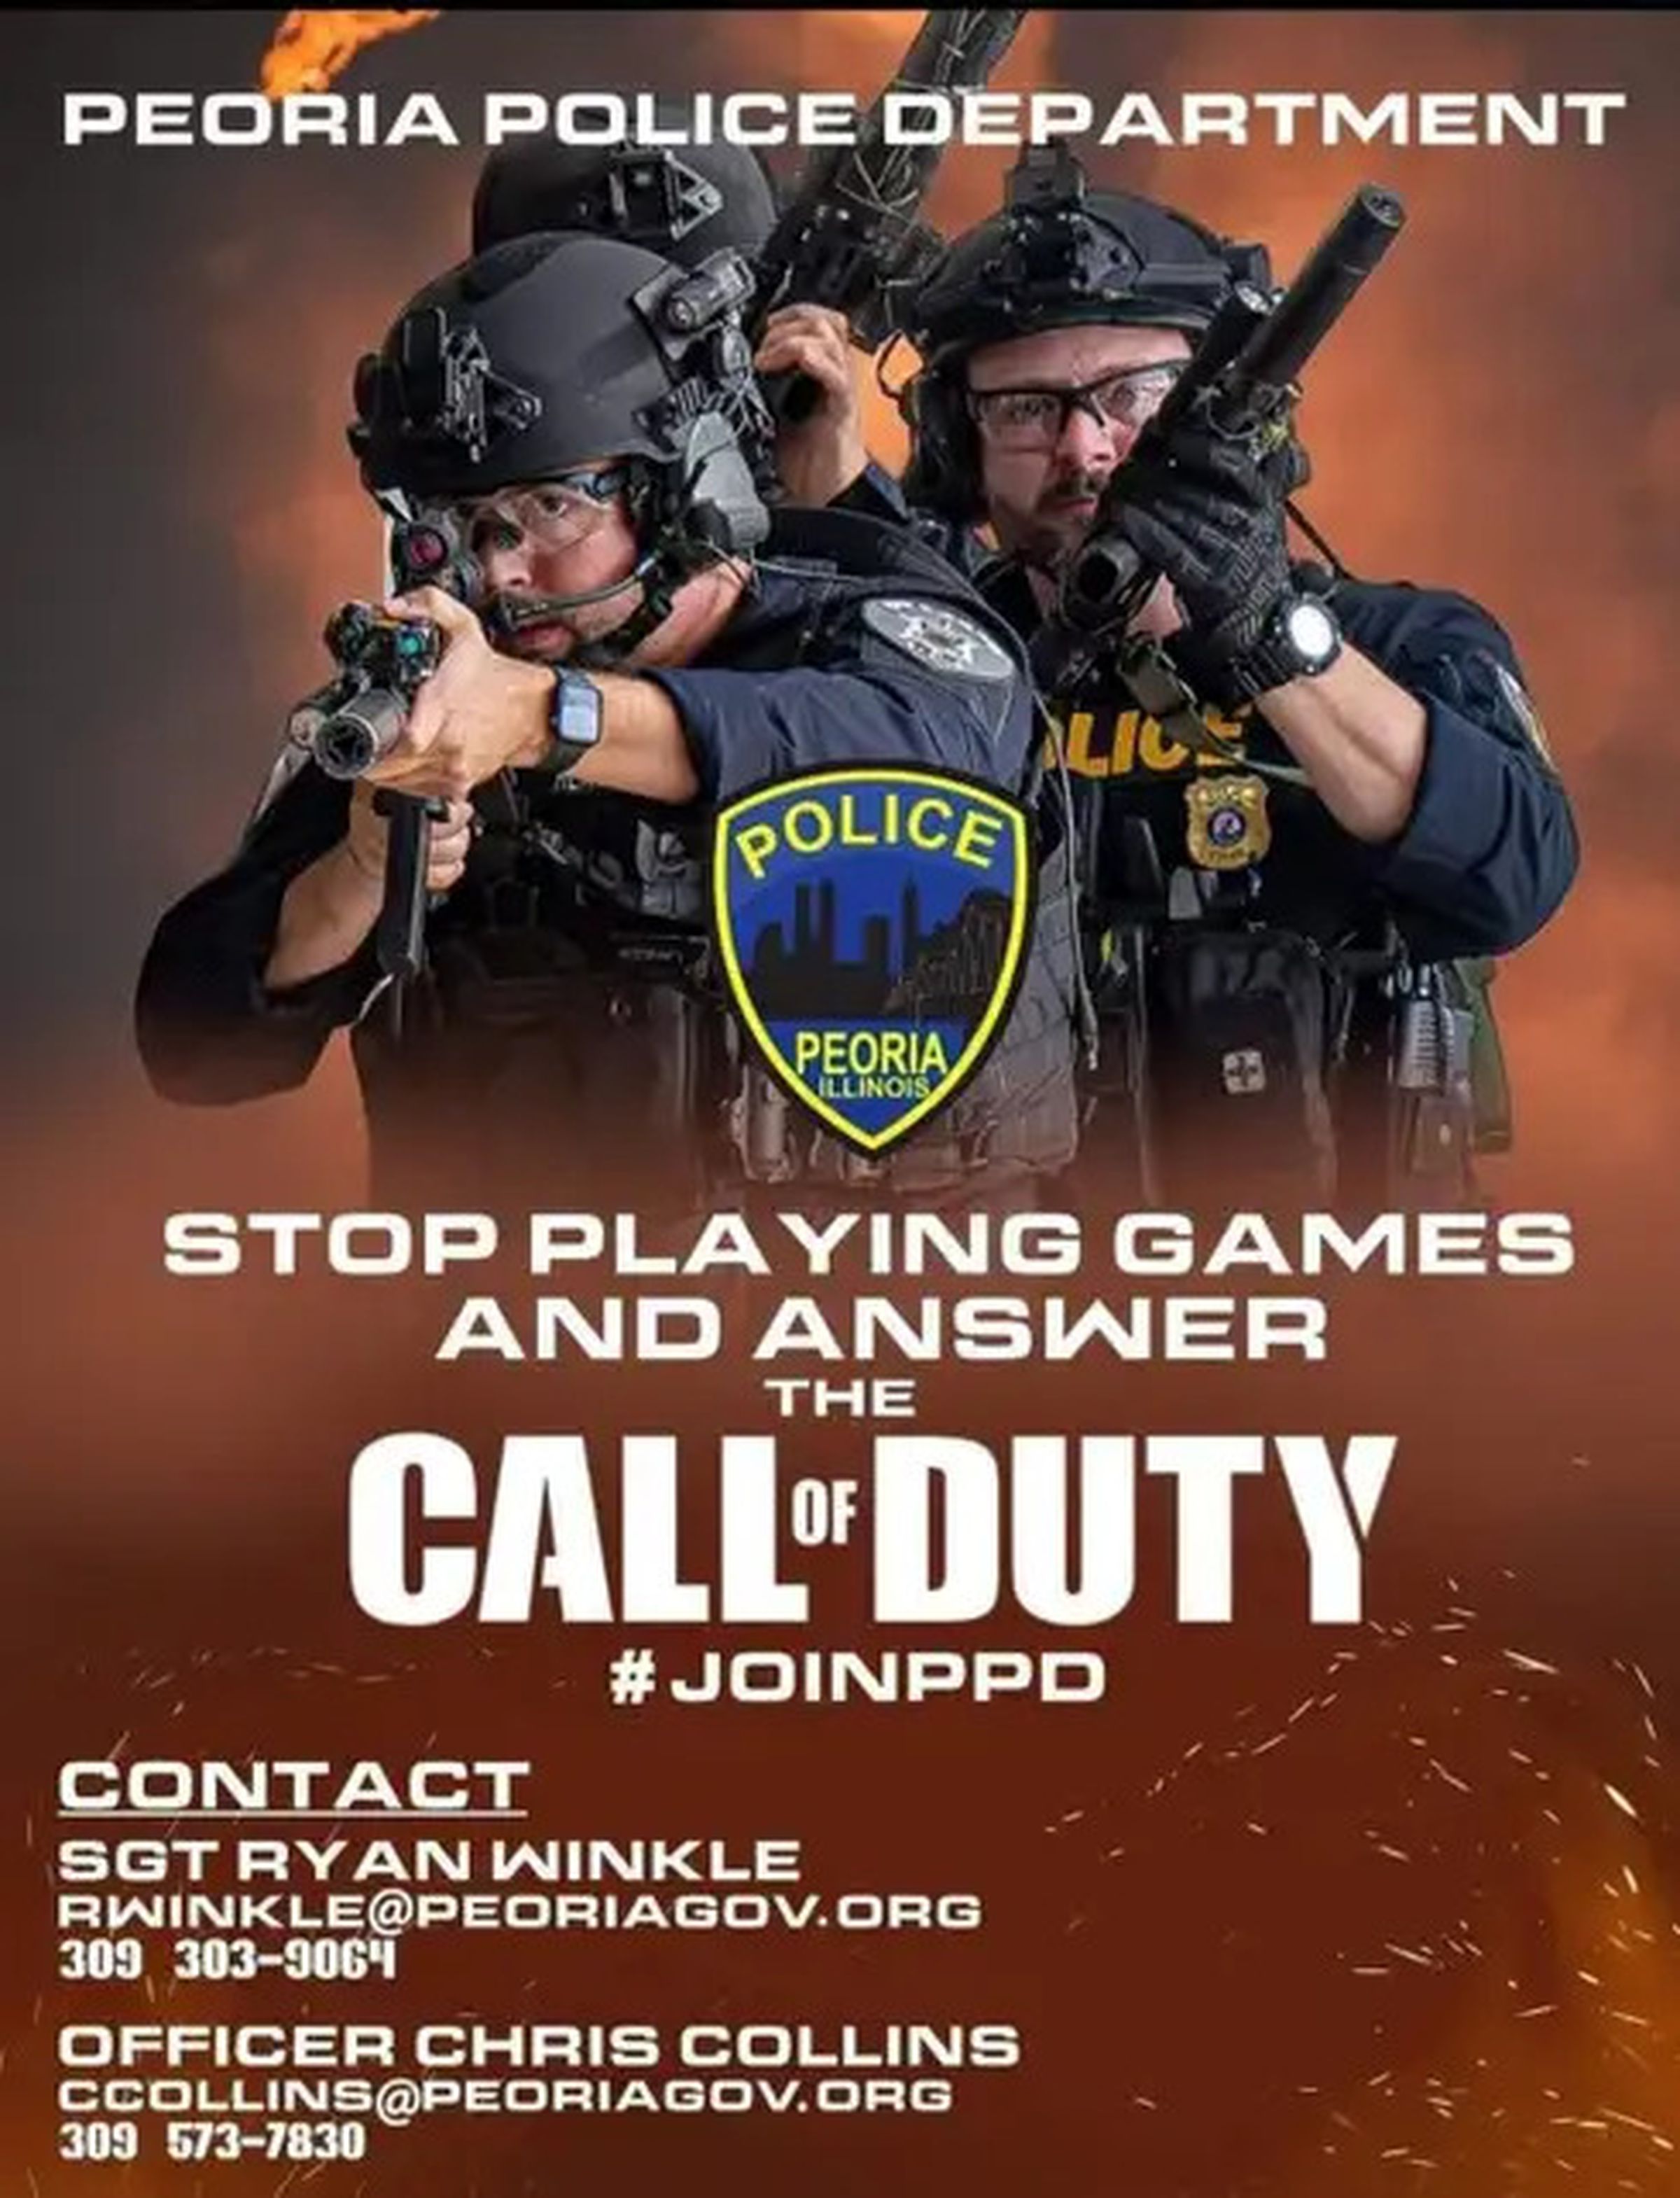 A recruitment poster featuring police officers pointing guns with the slogan “stop playing games and answer the call of duty.”